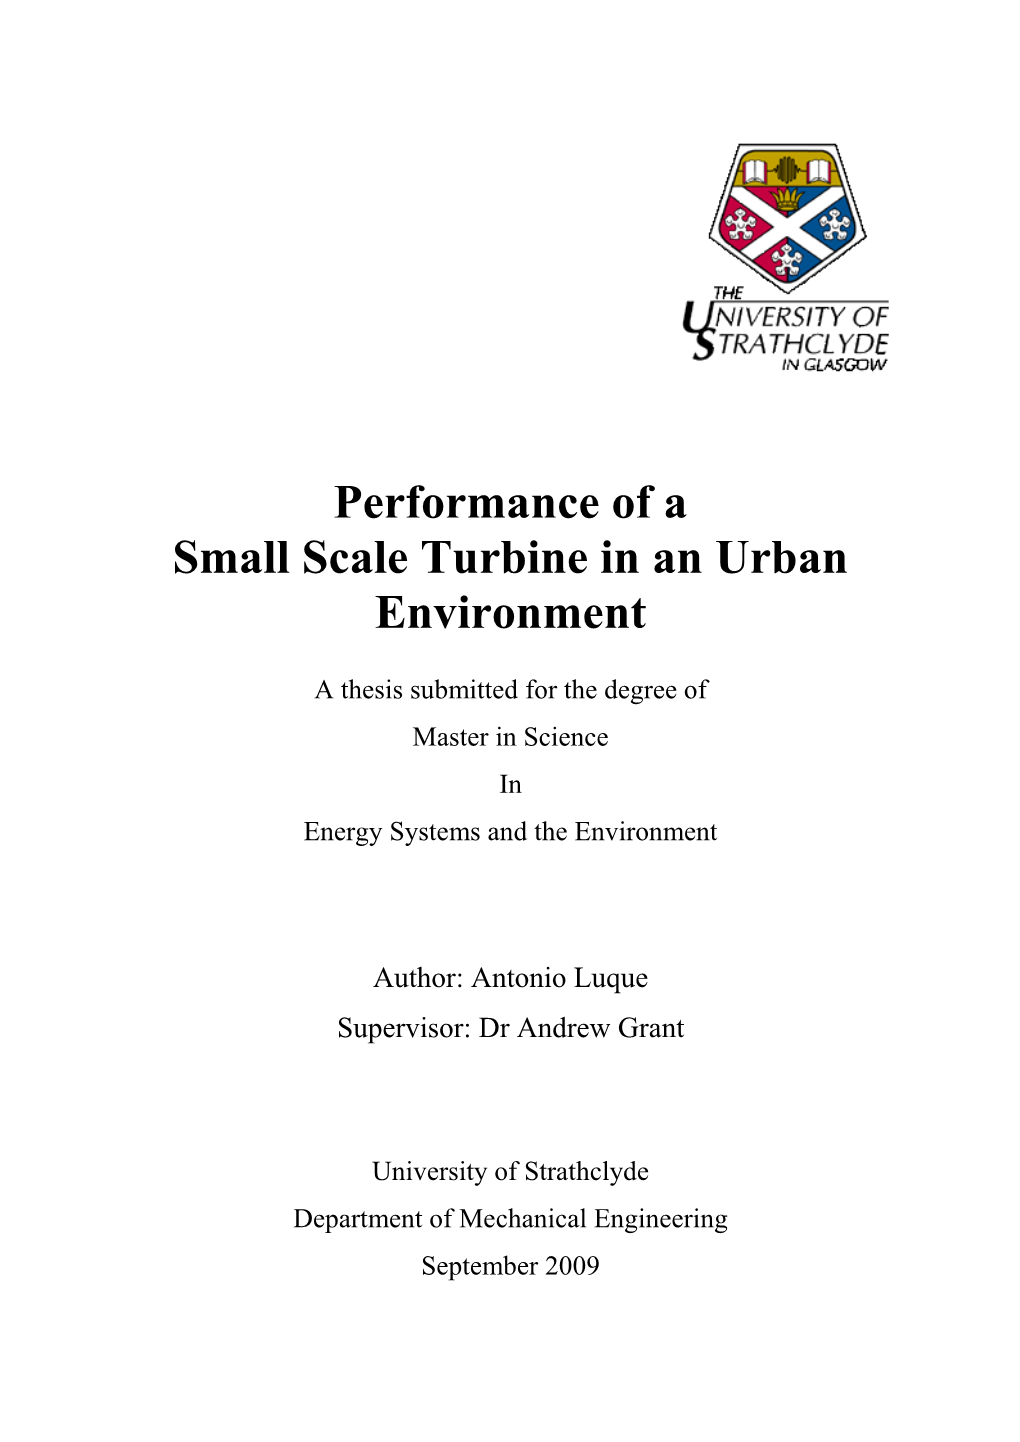 Performance of a Small Scale Turbine in an Urban Environment